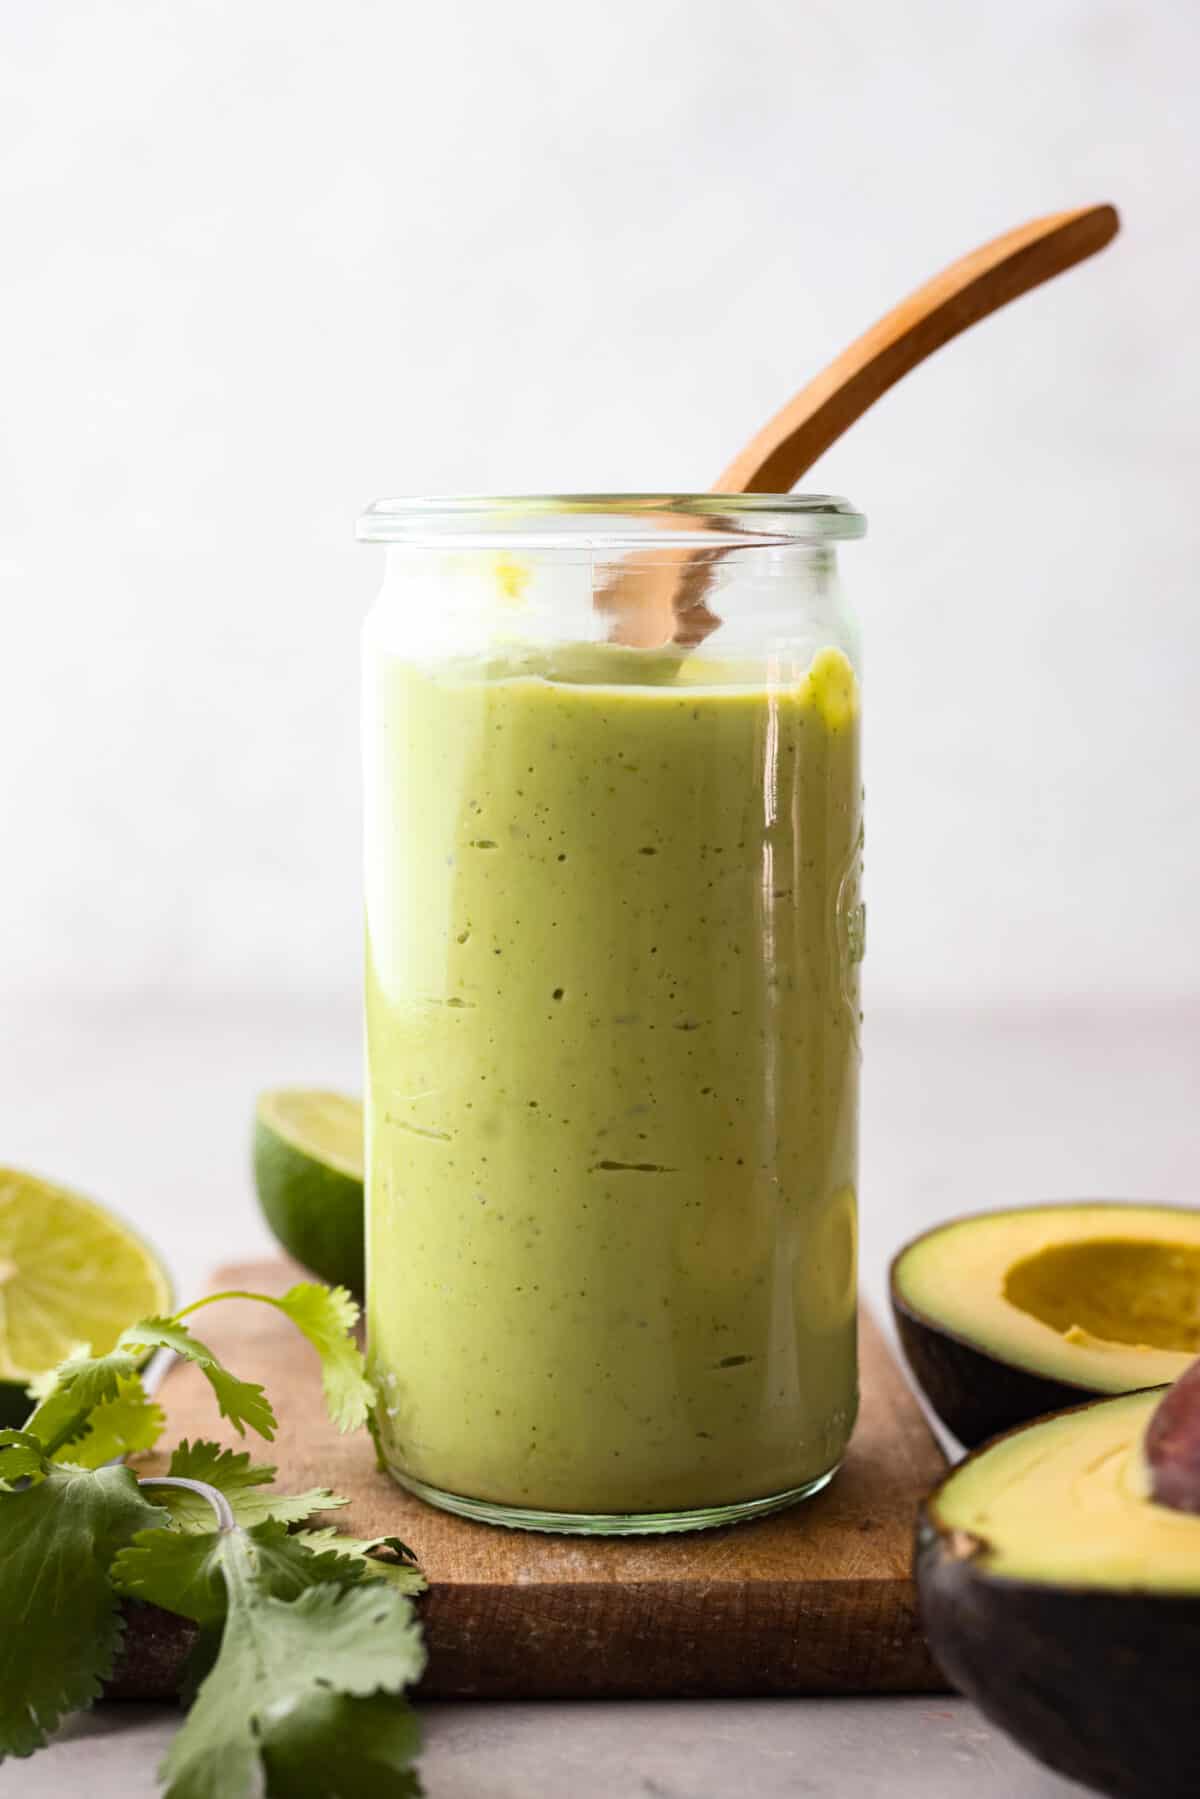 Side view of a glass jar filled with avocado dressing and a wooden spoon sticking out. There are avocados, limes and cilantro on the table next to the jar. 